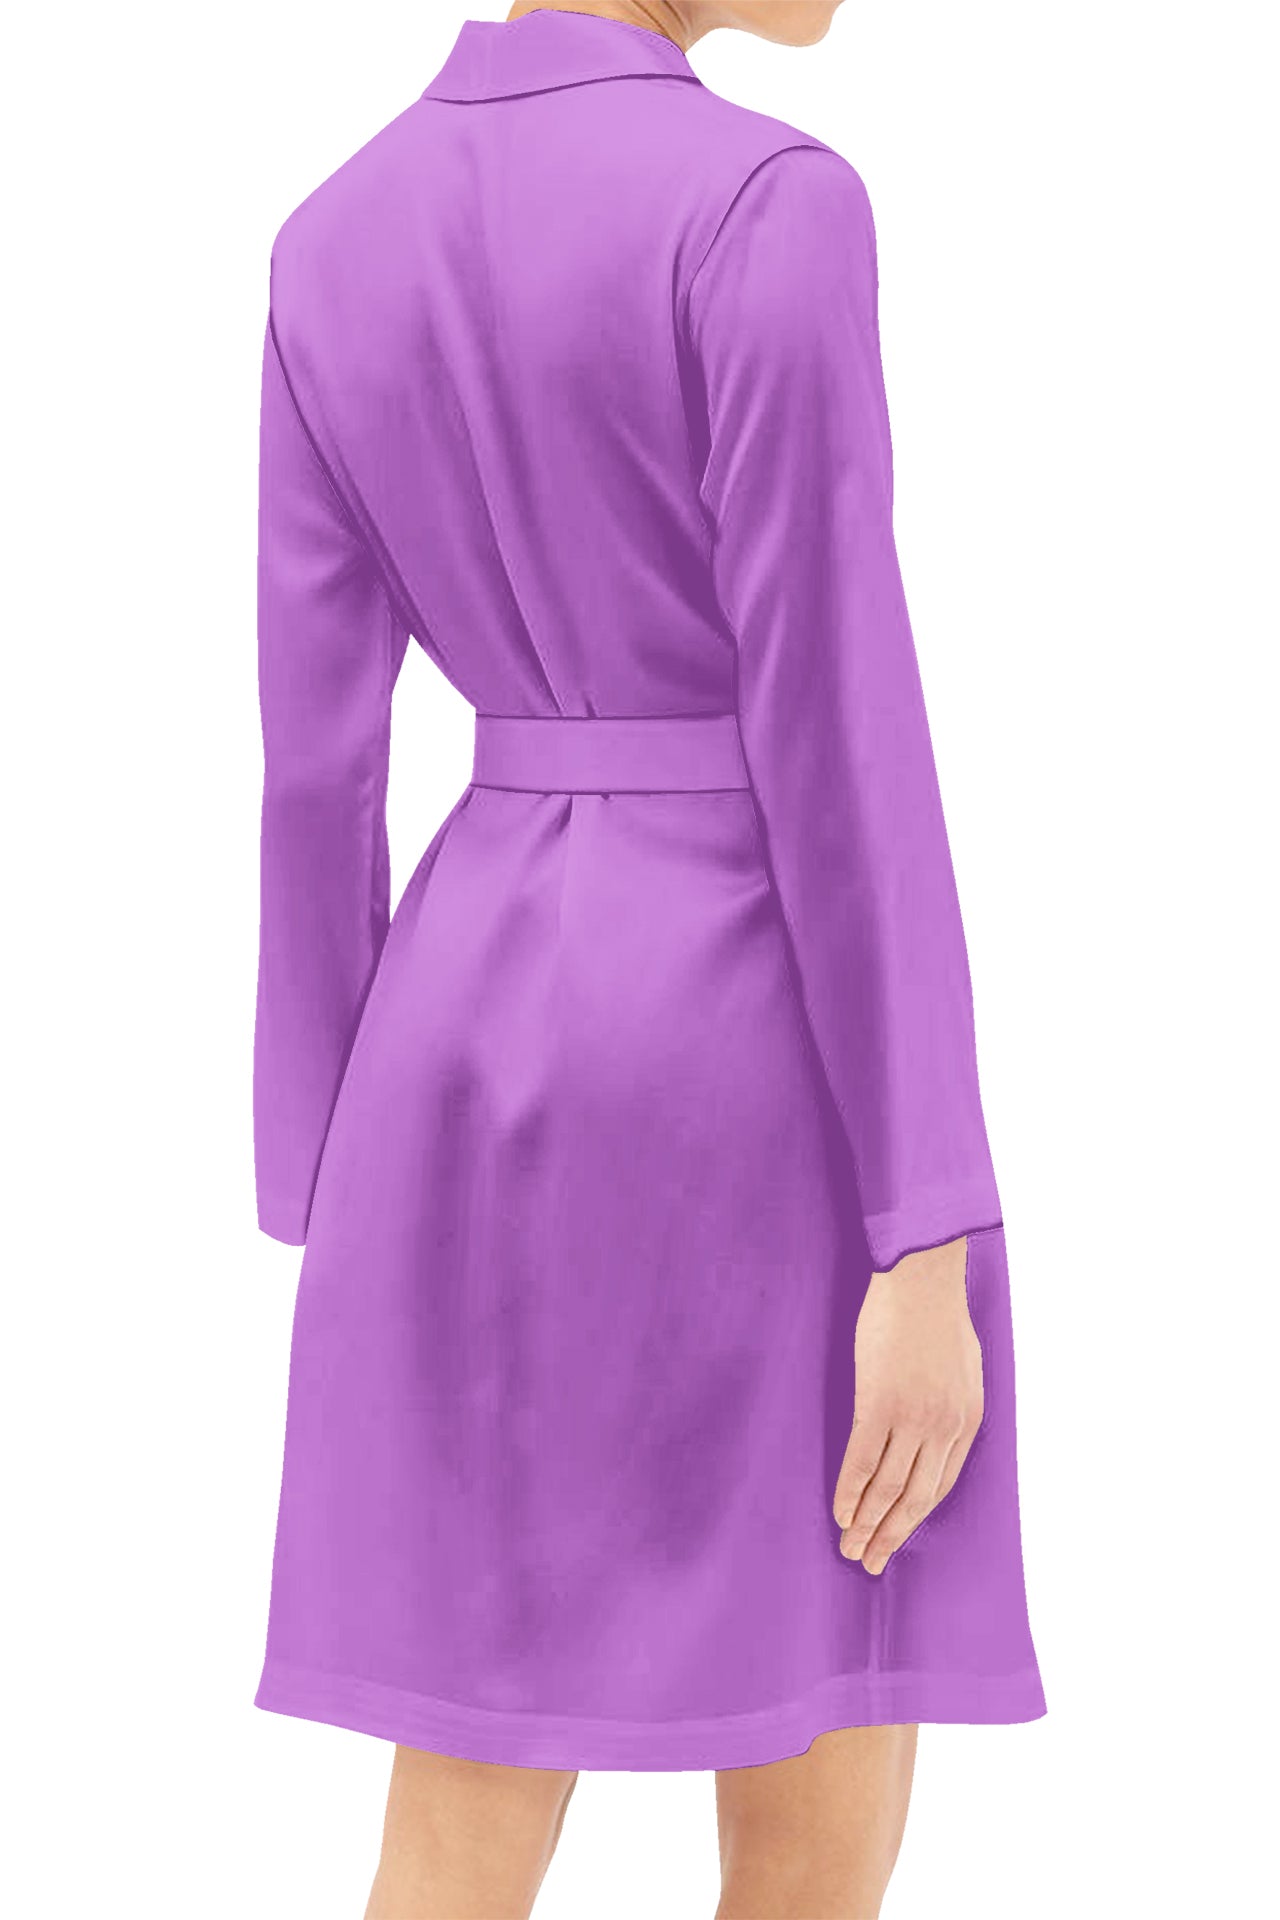 African Violet Mini Length Wrap Dress Made with Cupro